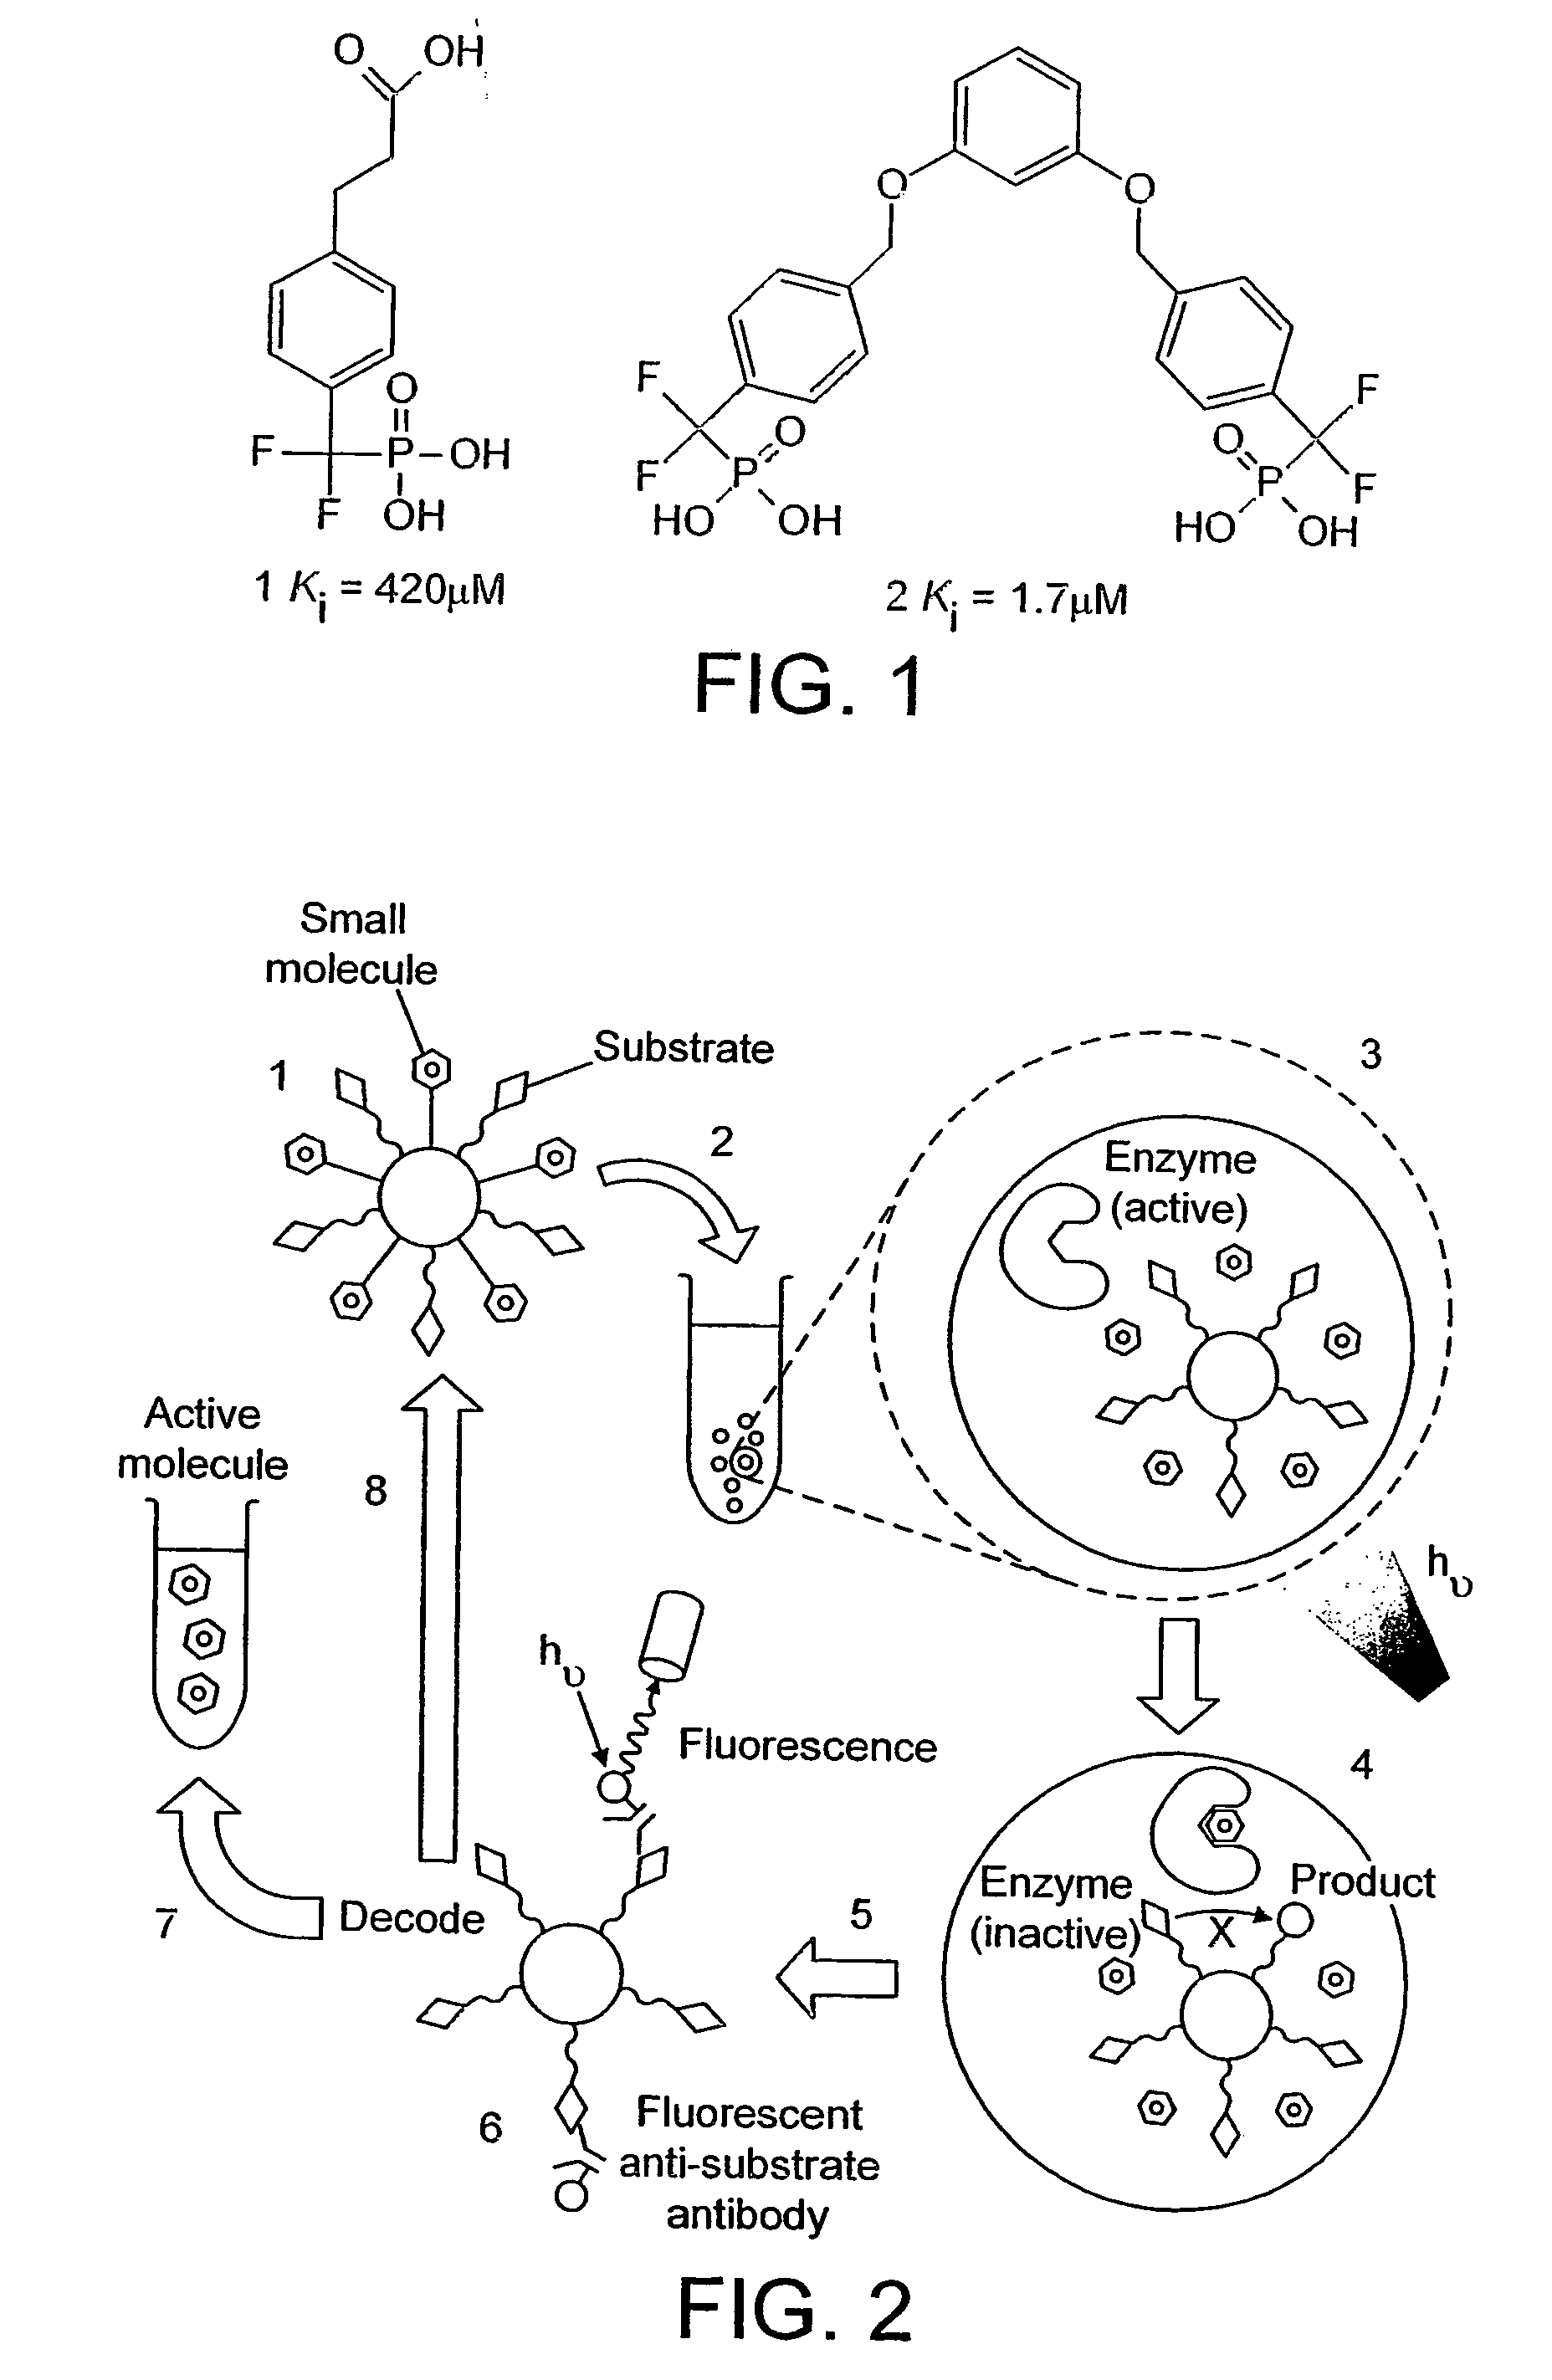 Method of synthesis and testing of combinatorial libraries using microcapsules